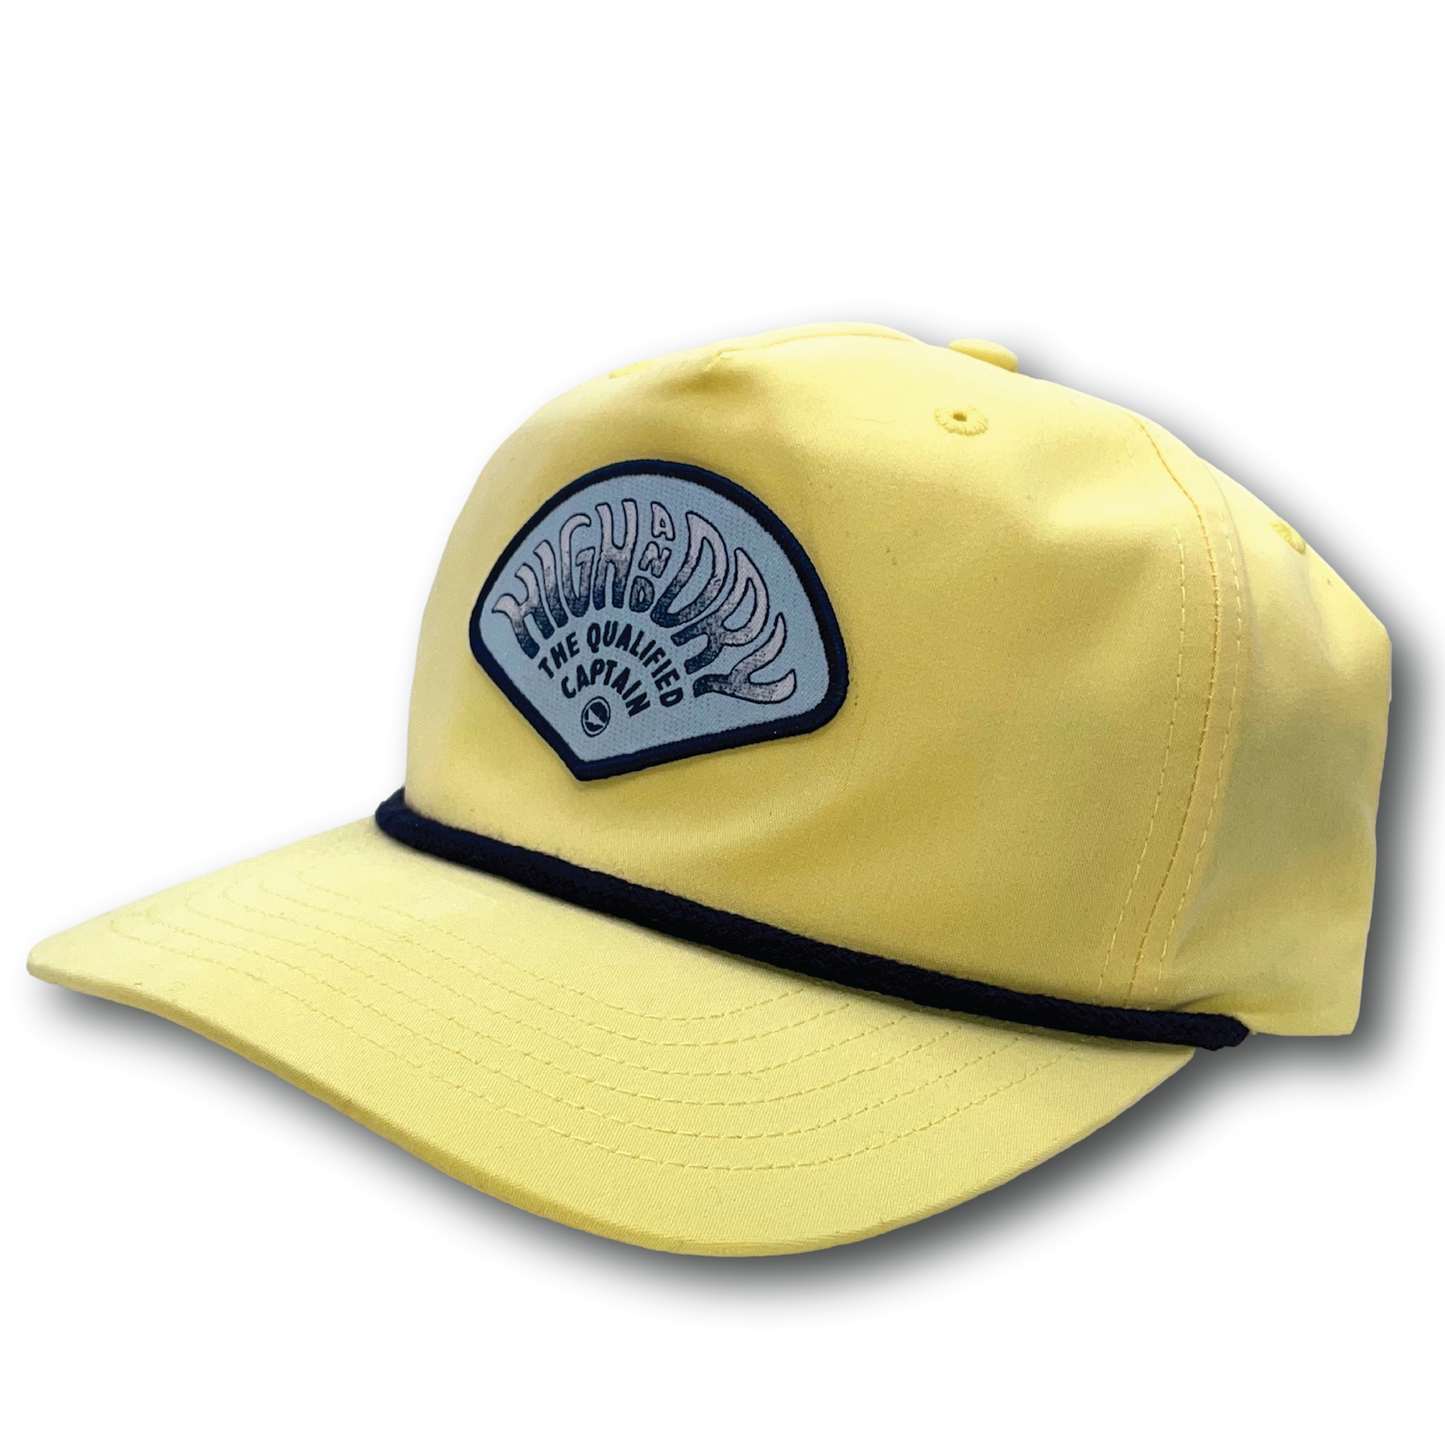 High & Dry Patch Golf Hats